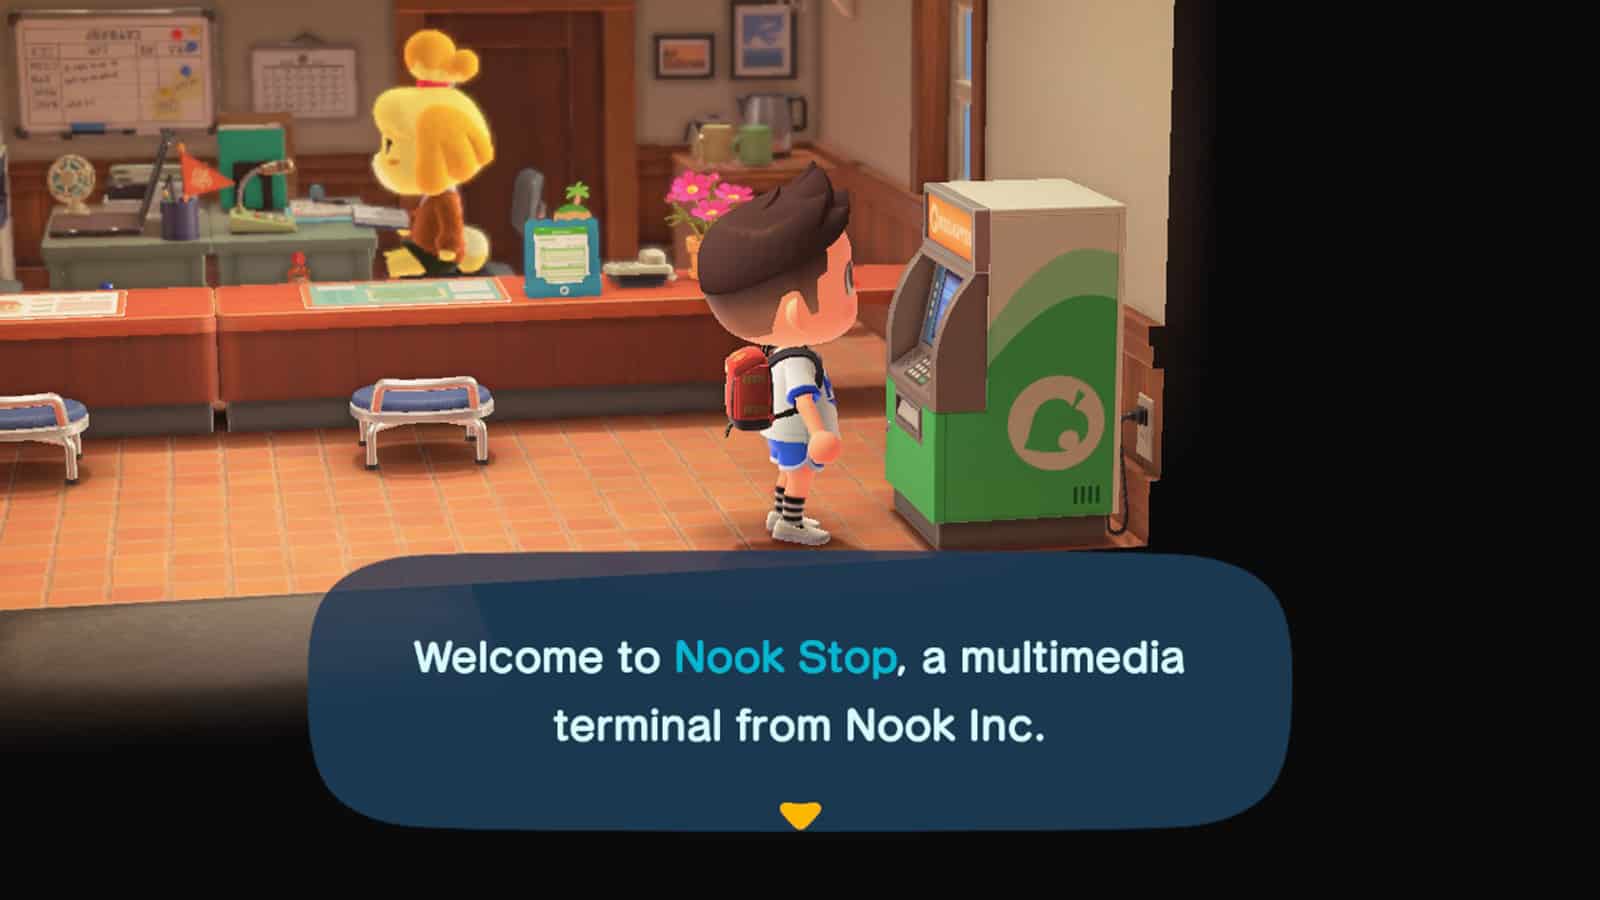 The Nook Stop terminal in Animal Crossing New horizons